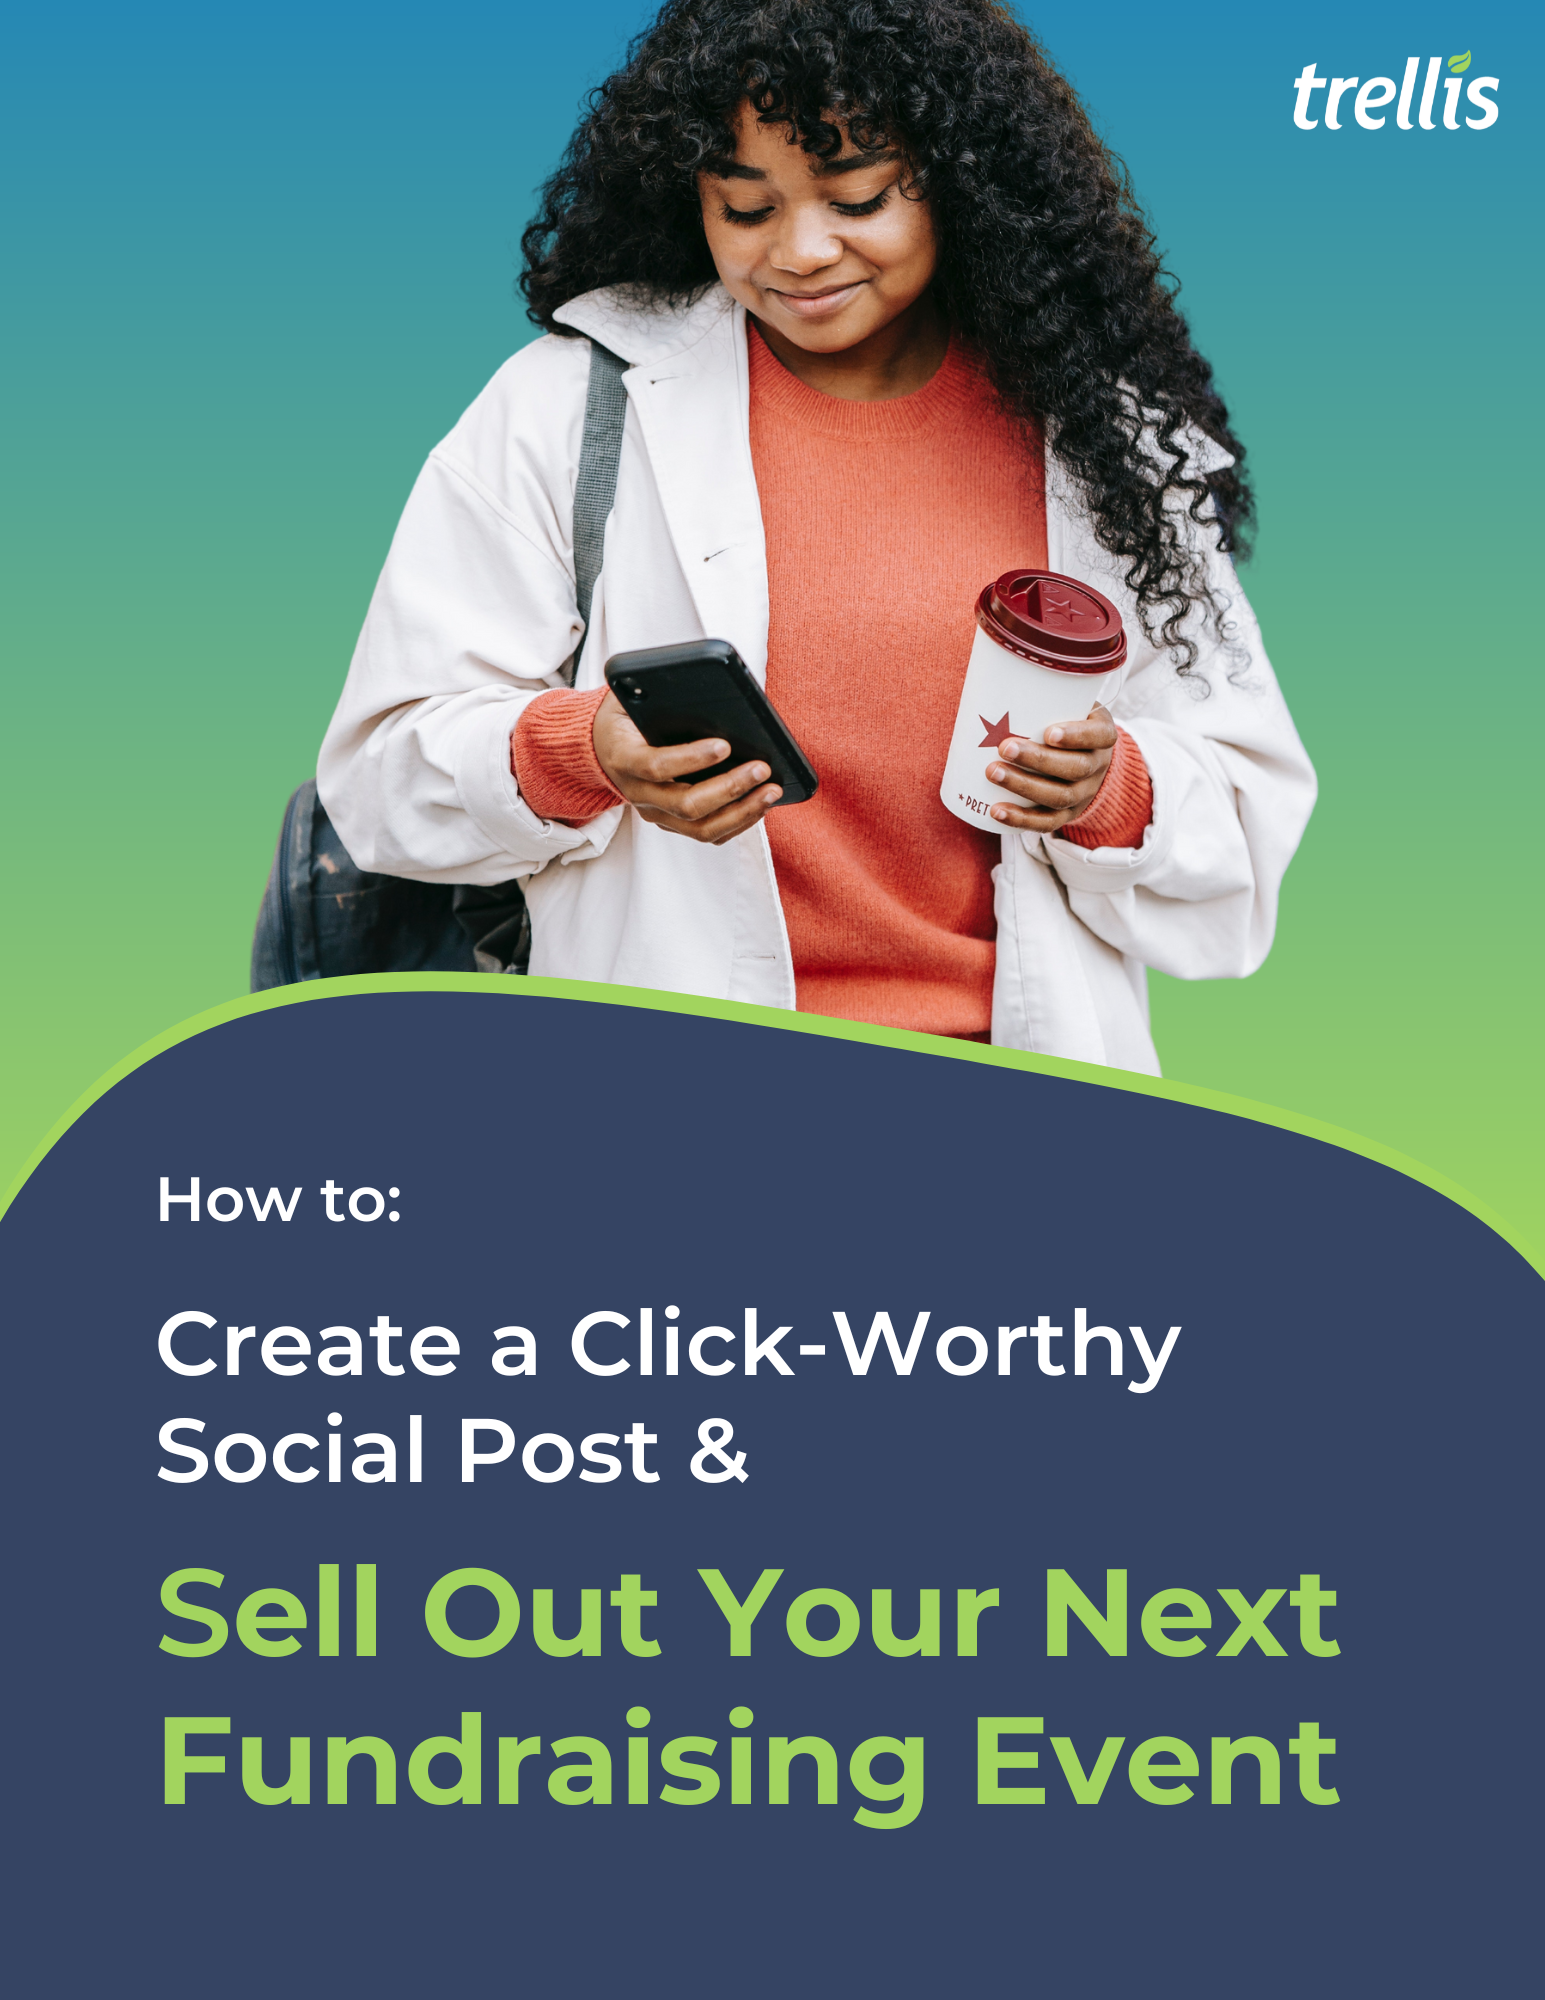 How to Create a Click-Worthy Social Post and Sell Out Your Next Fundraising Event Cover